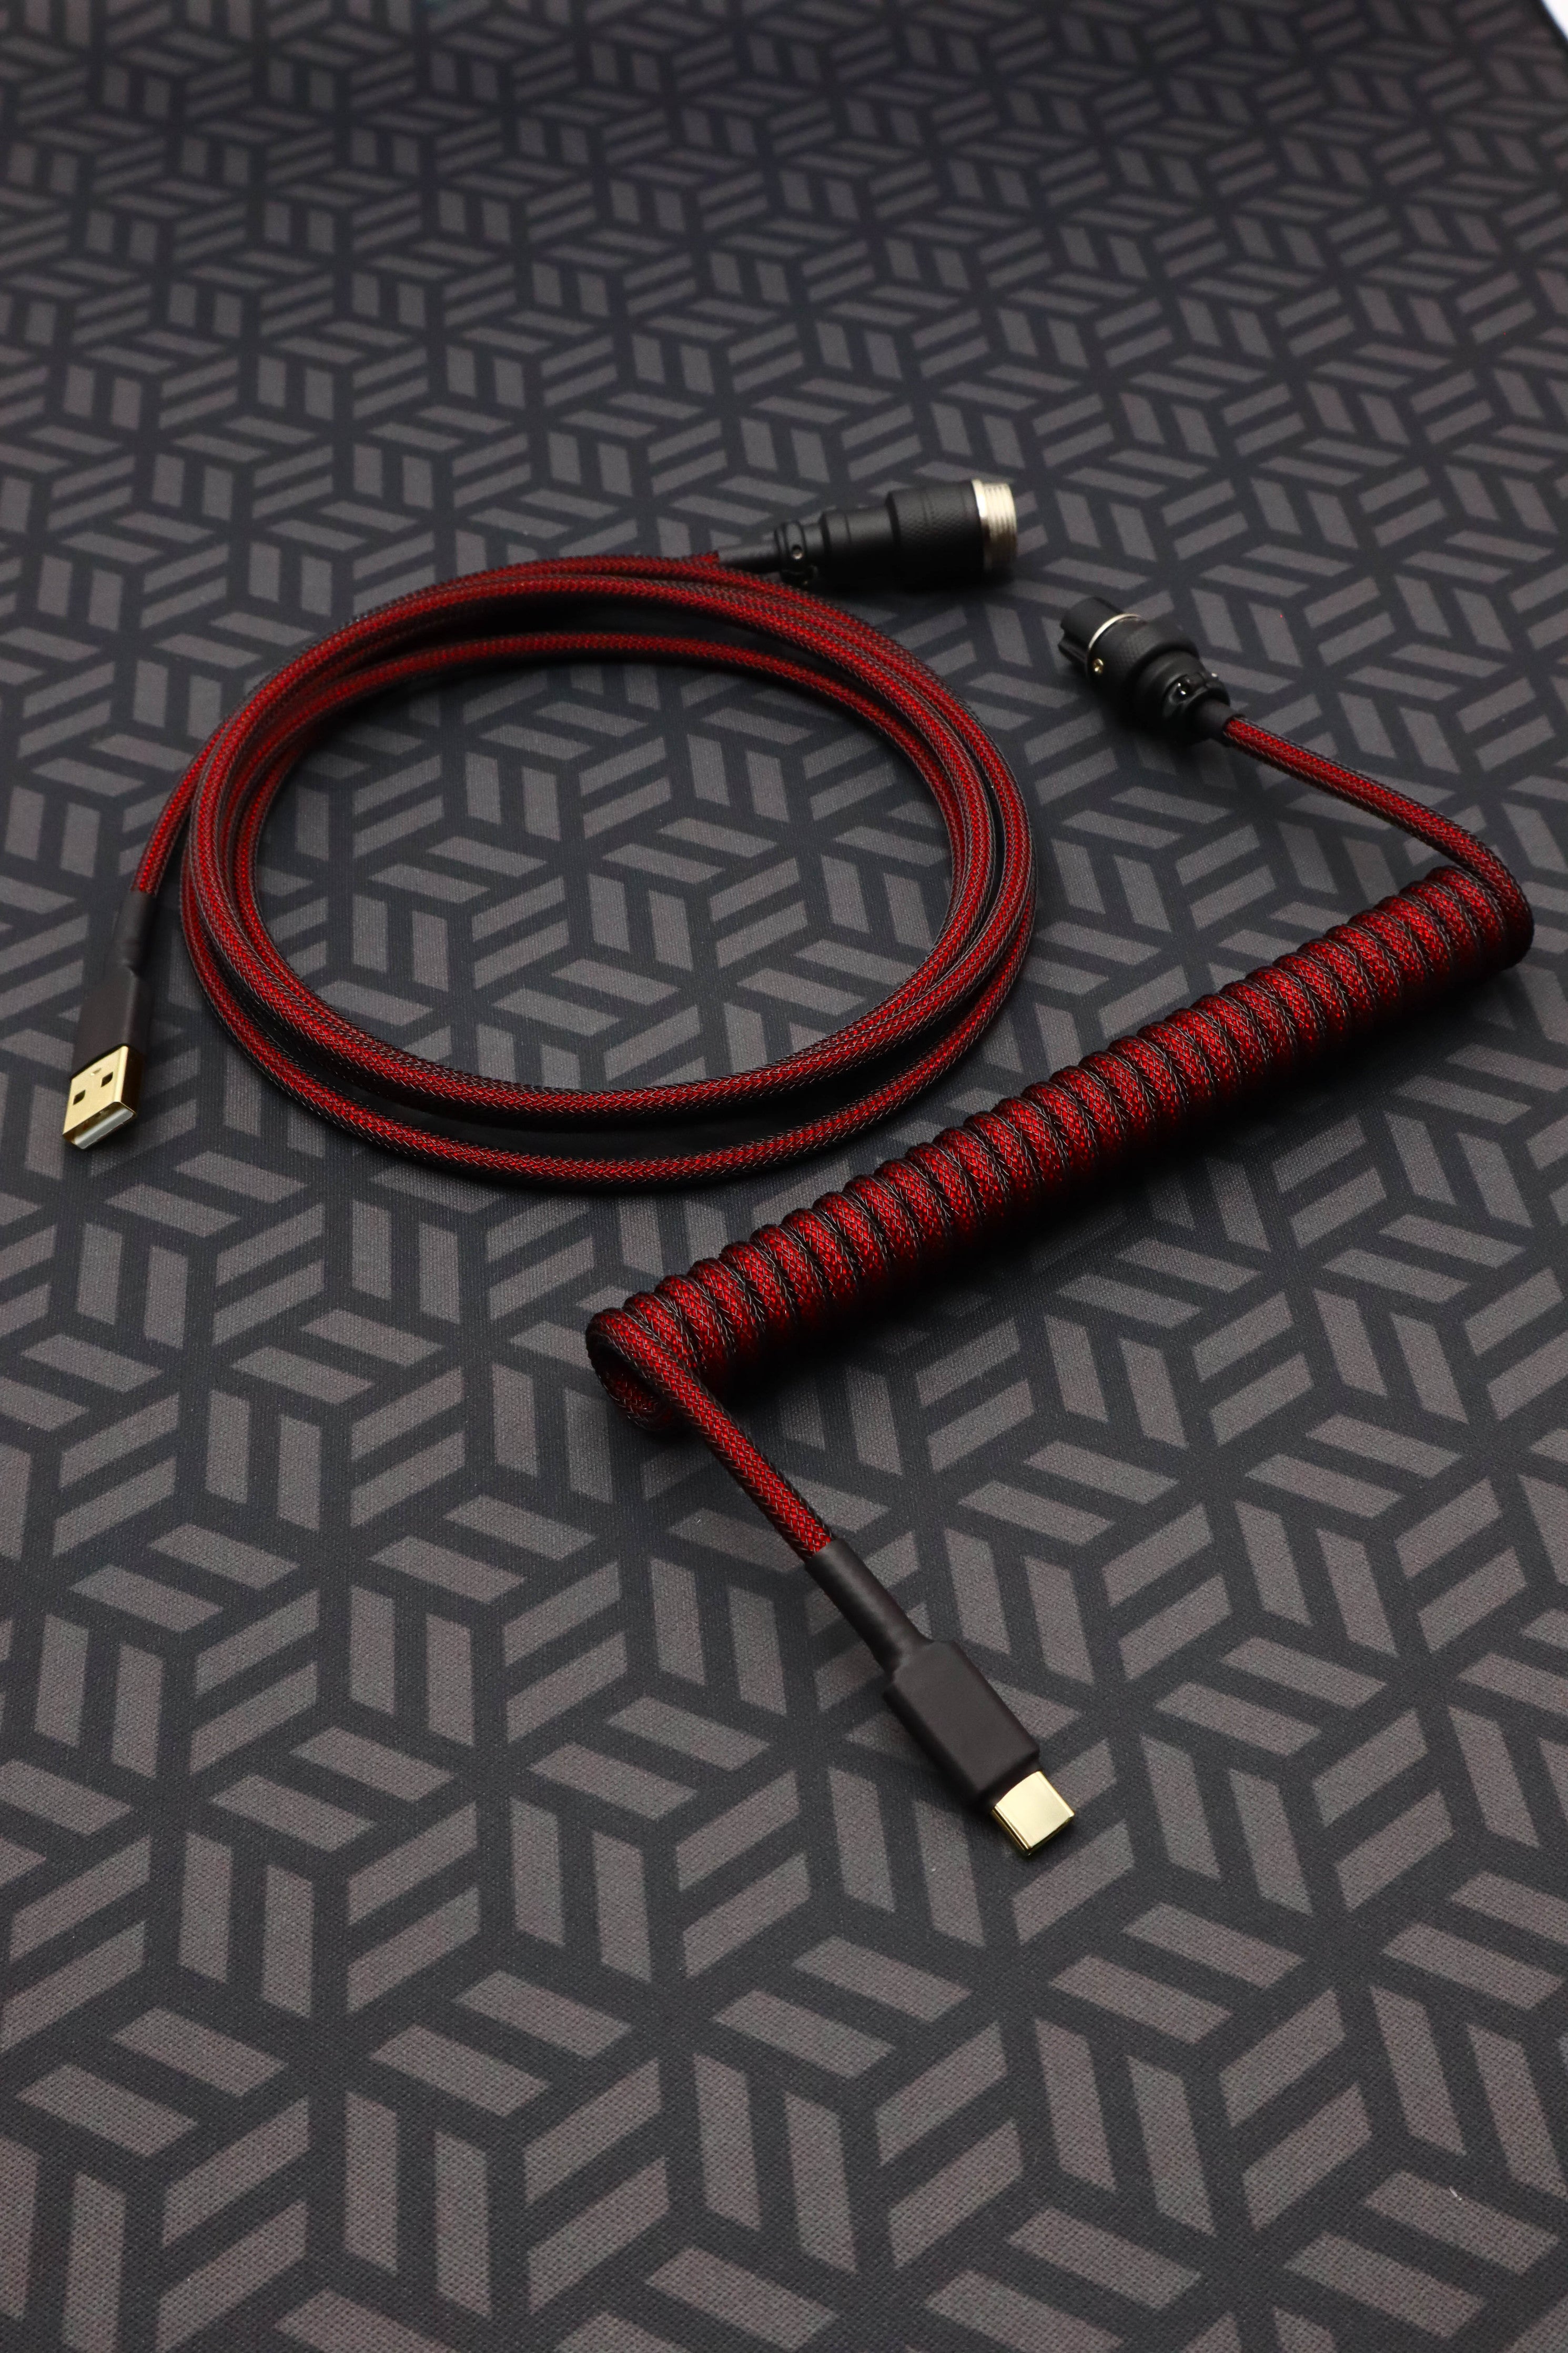 Custom Keyboard Cables – SwiftCables